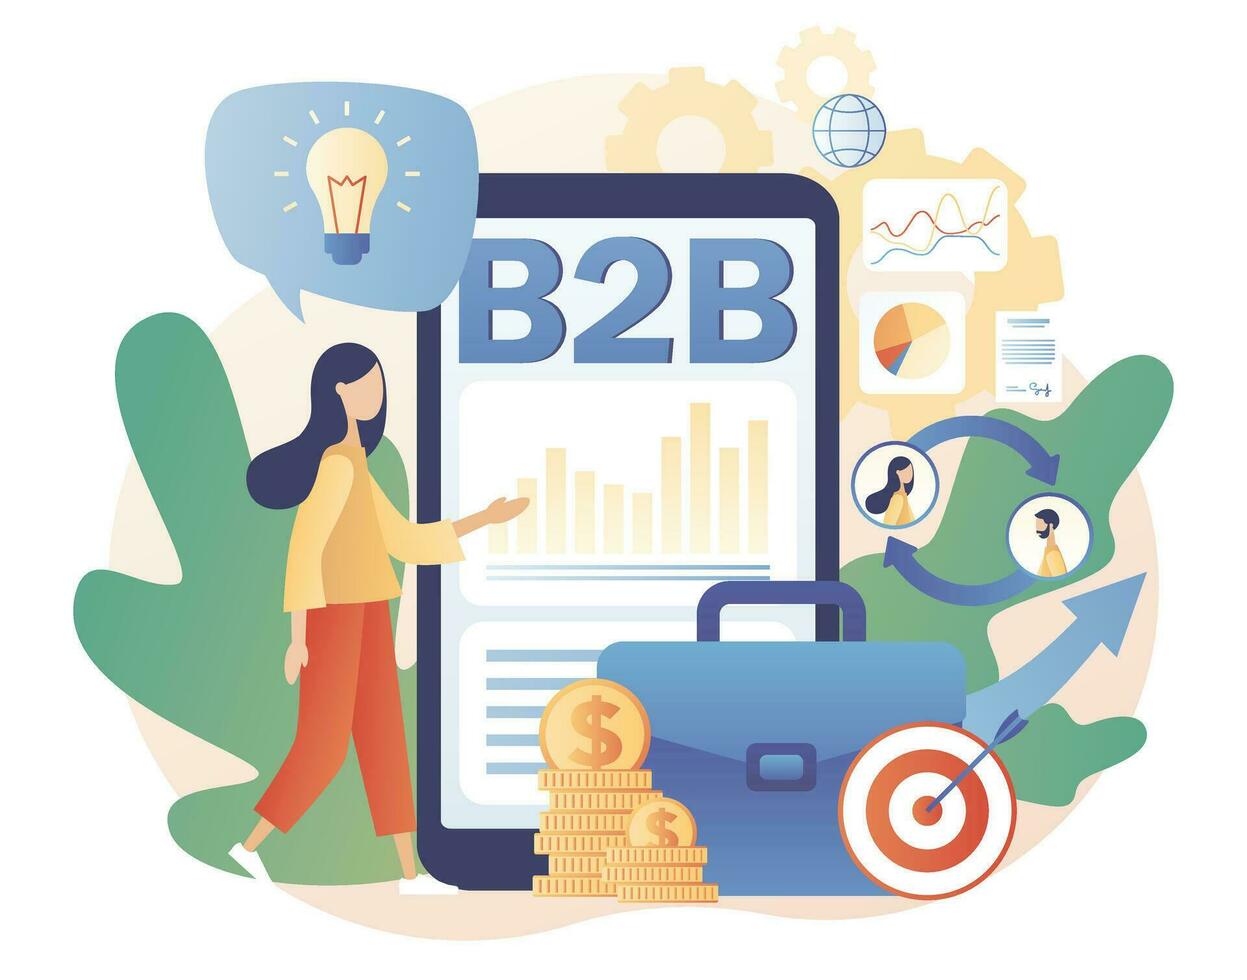 B2B. Business to business. Tiny businesswoman enter into agreement online. Successful business collaboration. Marketing strategy, commerce. Modern flat cartoon style. Vector illustration